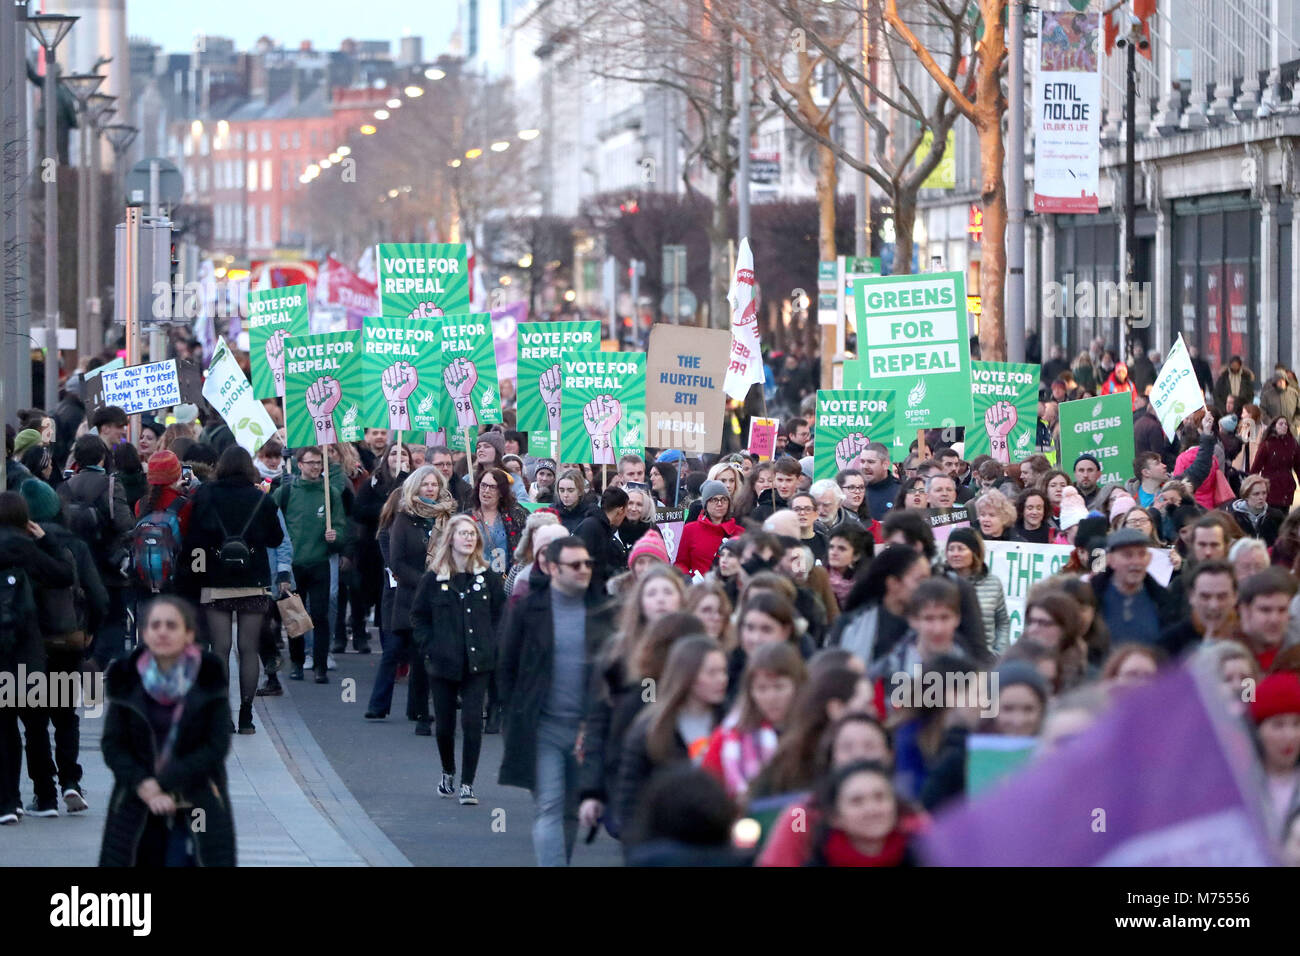 People carrying various signs, as participants take part in a march through Dublin city centre calling for the repeal of the 8th amendment to the Irish constitution. Stock Photo